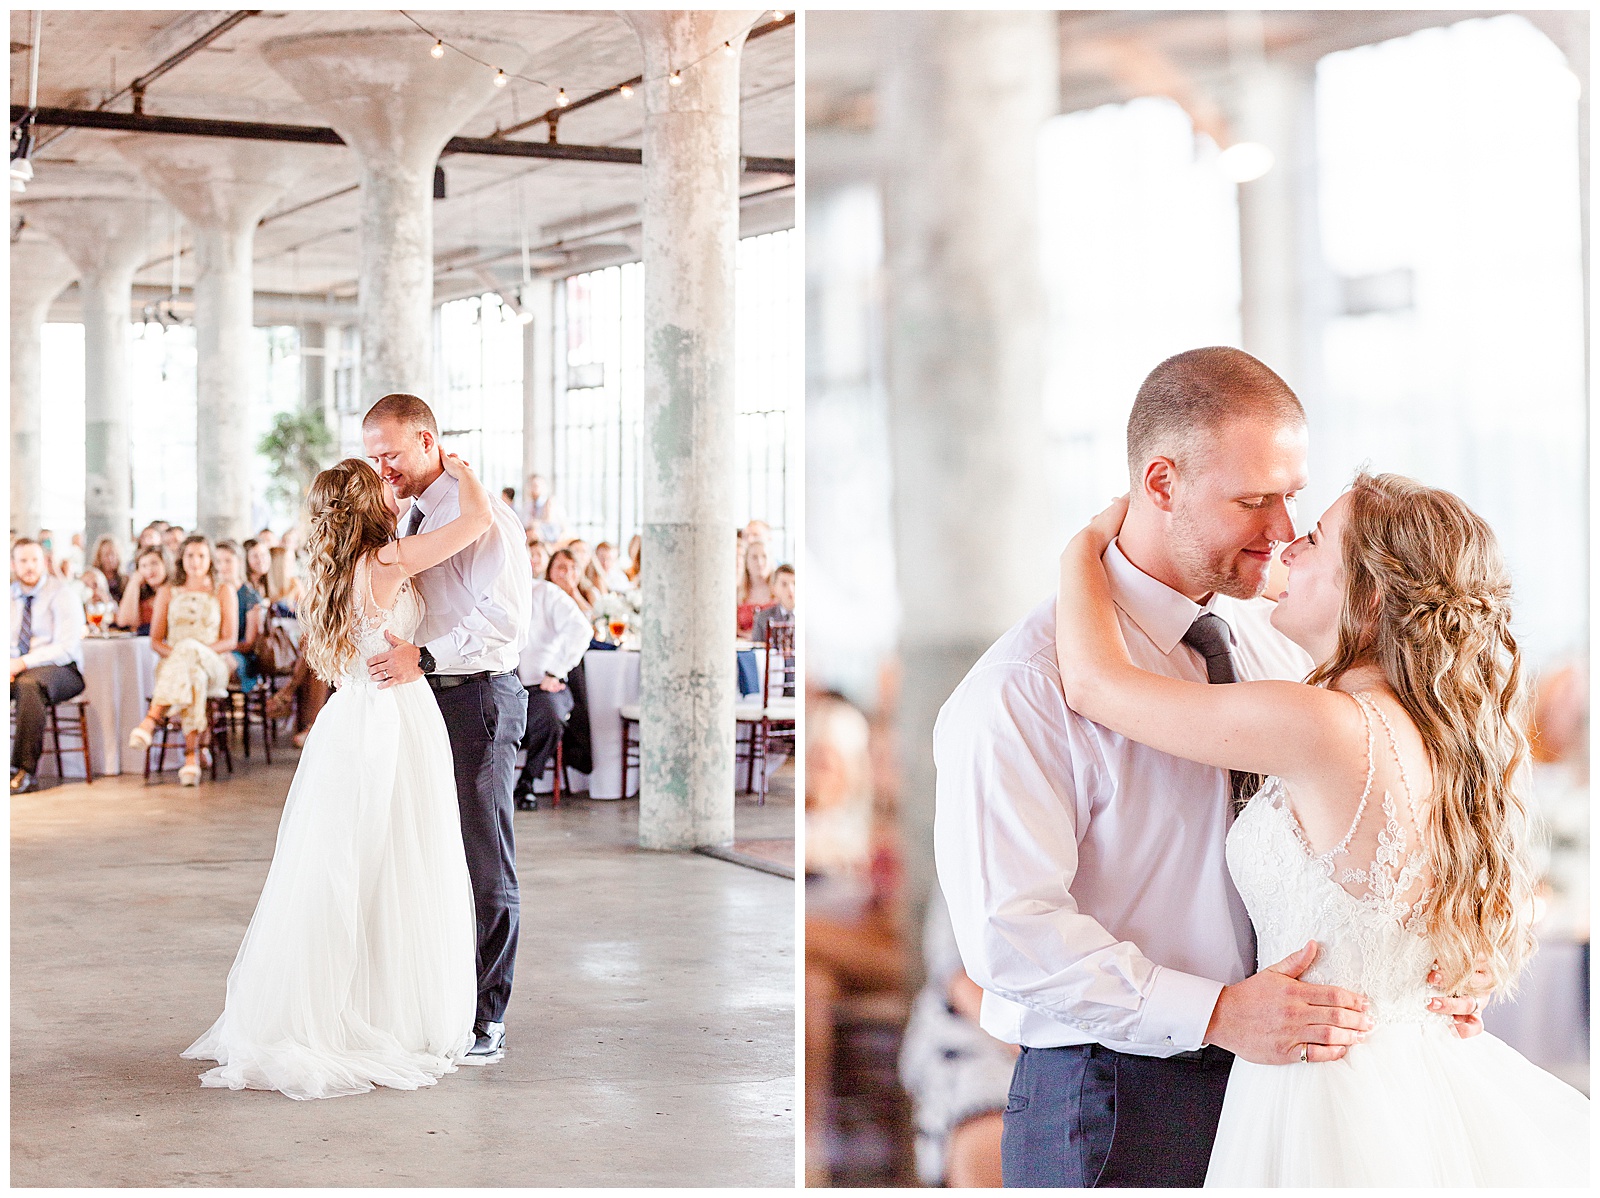 Bride and Groom Emotional First Dance at Rustic Airy Indoor Wedding Venue with fairy lights in Elegant Modern Summer Wedding in Charlotte, NC | check out the full wedding at KevynDixonPhoto.com